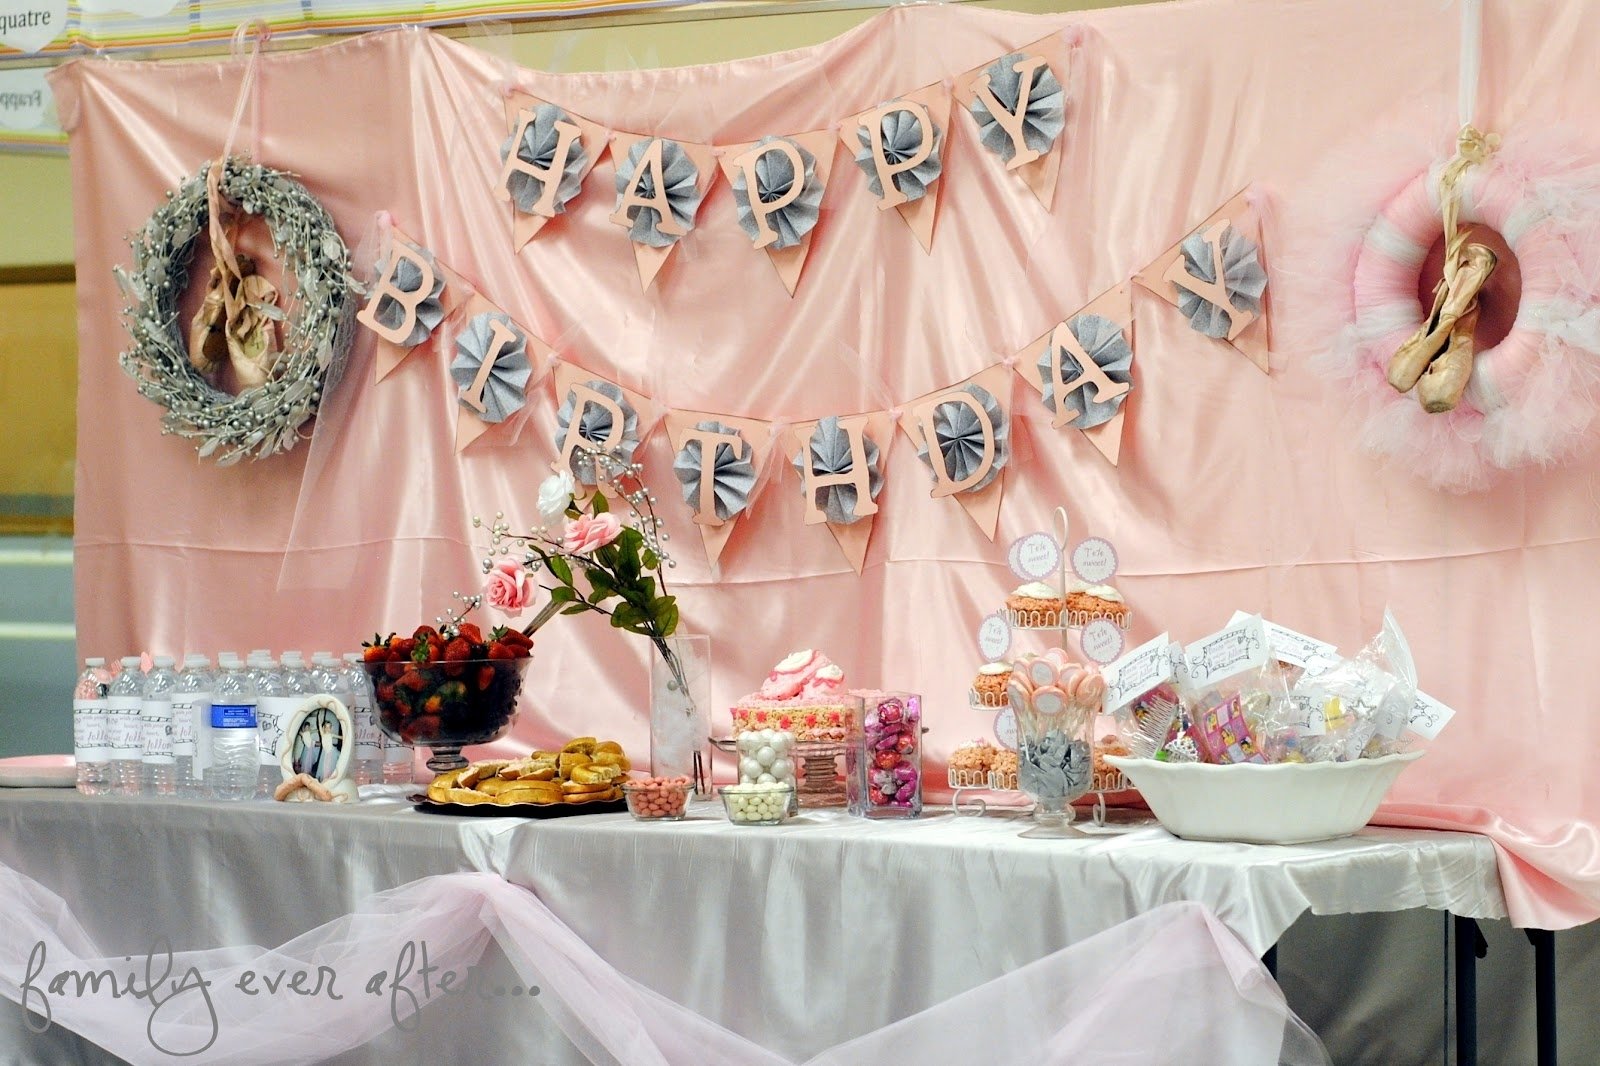 10 Trendy Ideas For Girls Birthday Parties 50 birthday party themes for girls i heart nap time 54 2022